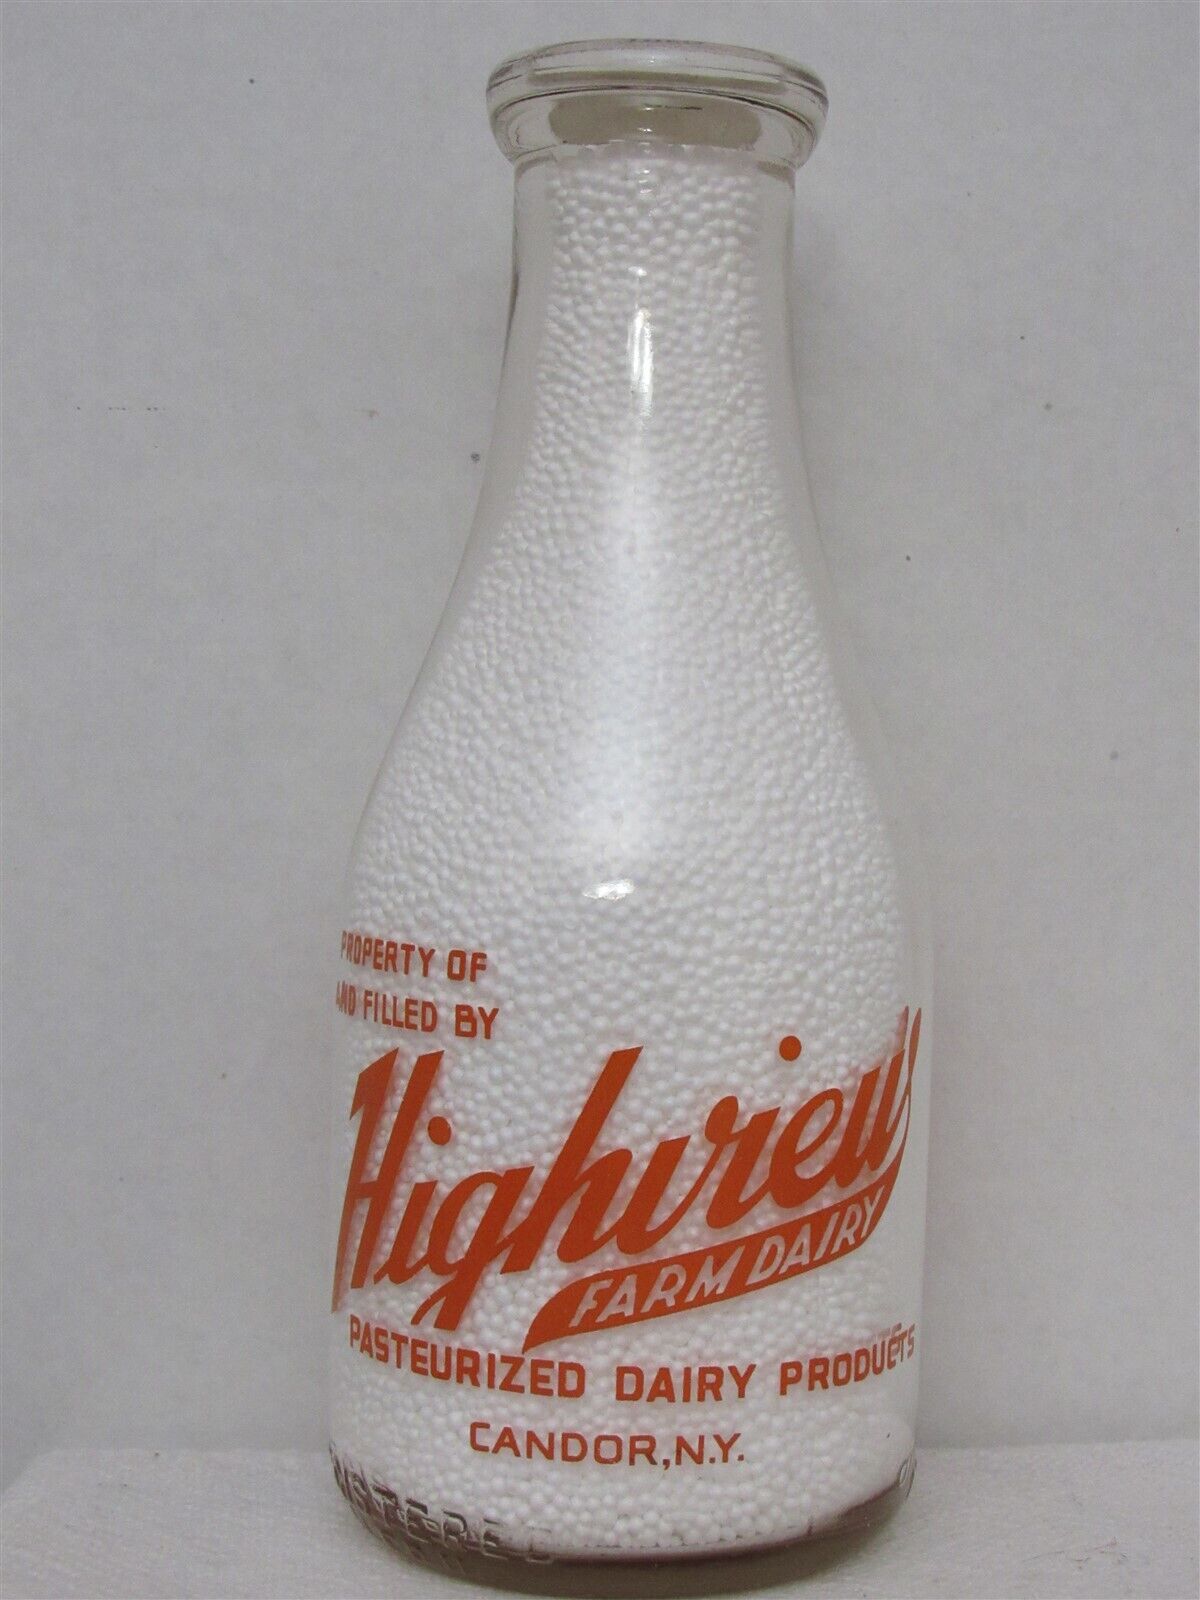 TRPQ Milk Bottle Highview Farm Dairy Candor NY 1948 PASTEURIZED DAIRY PRODUCTS